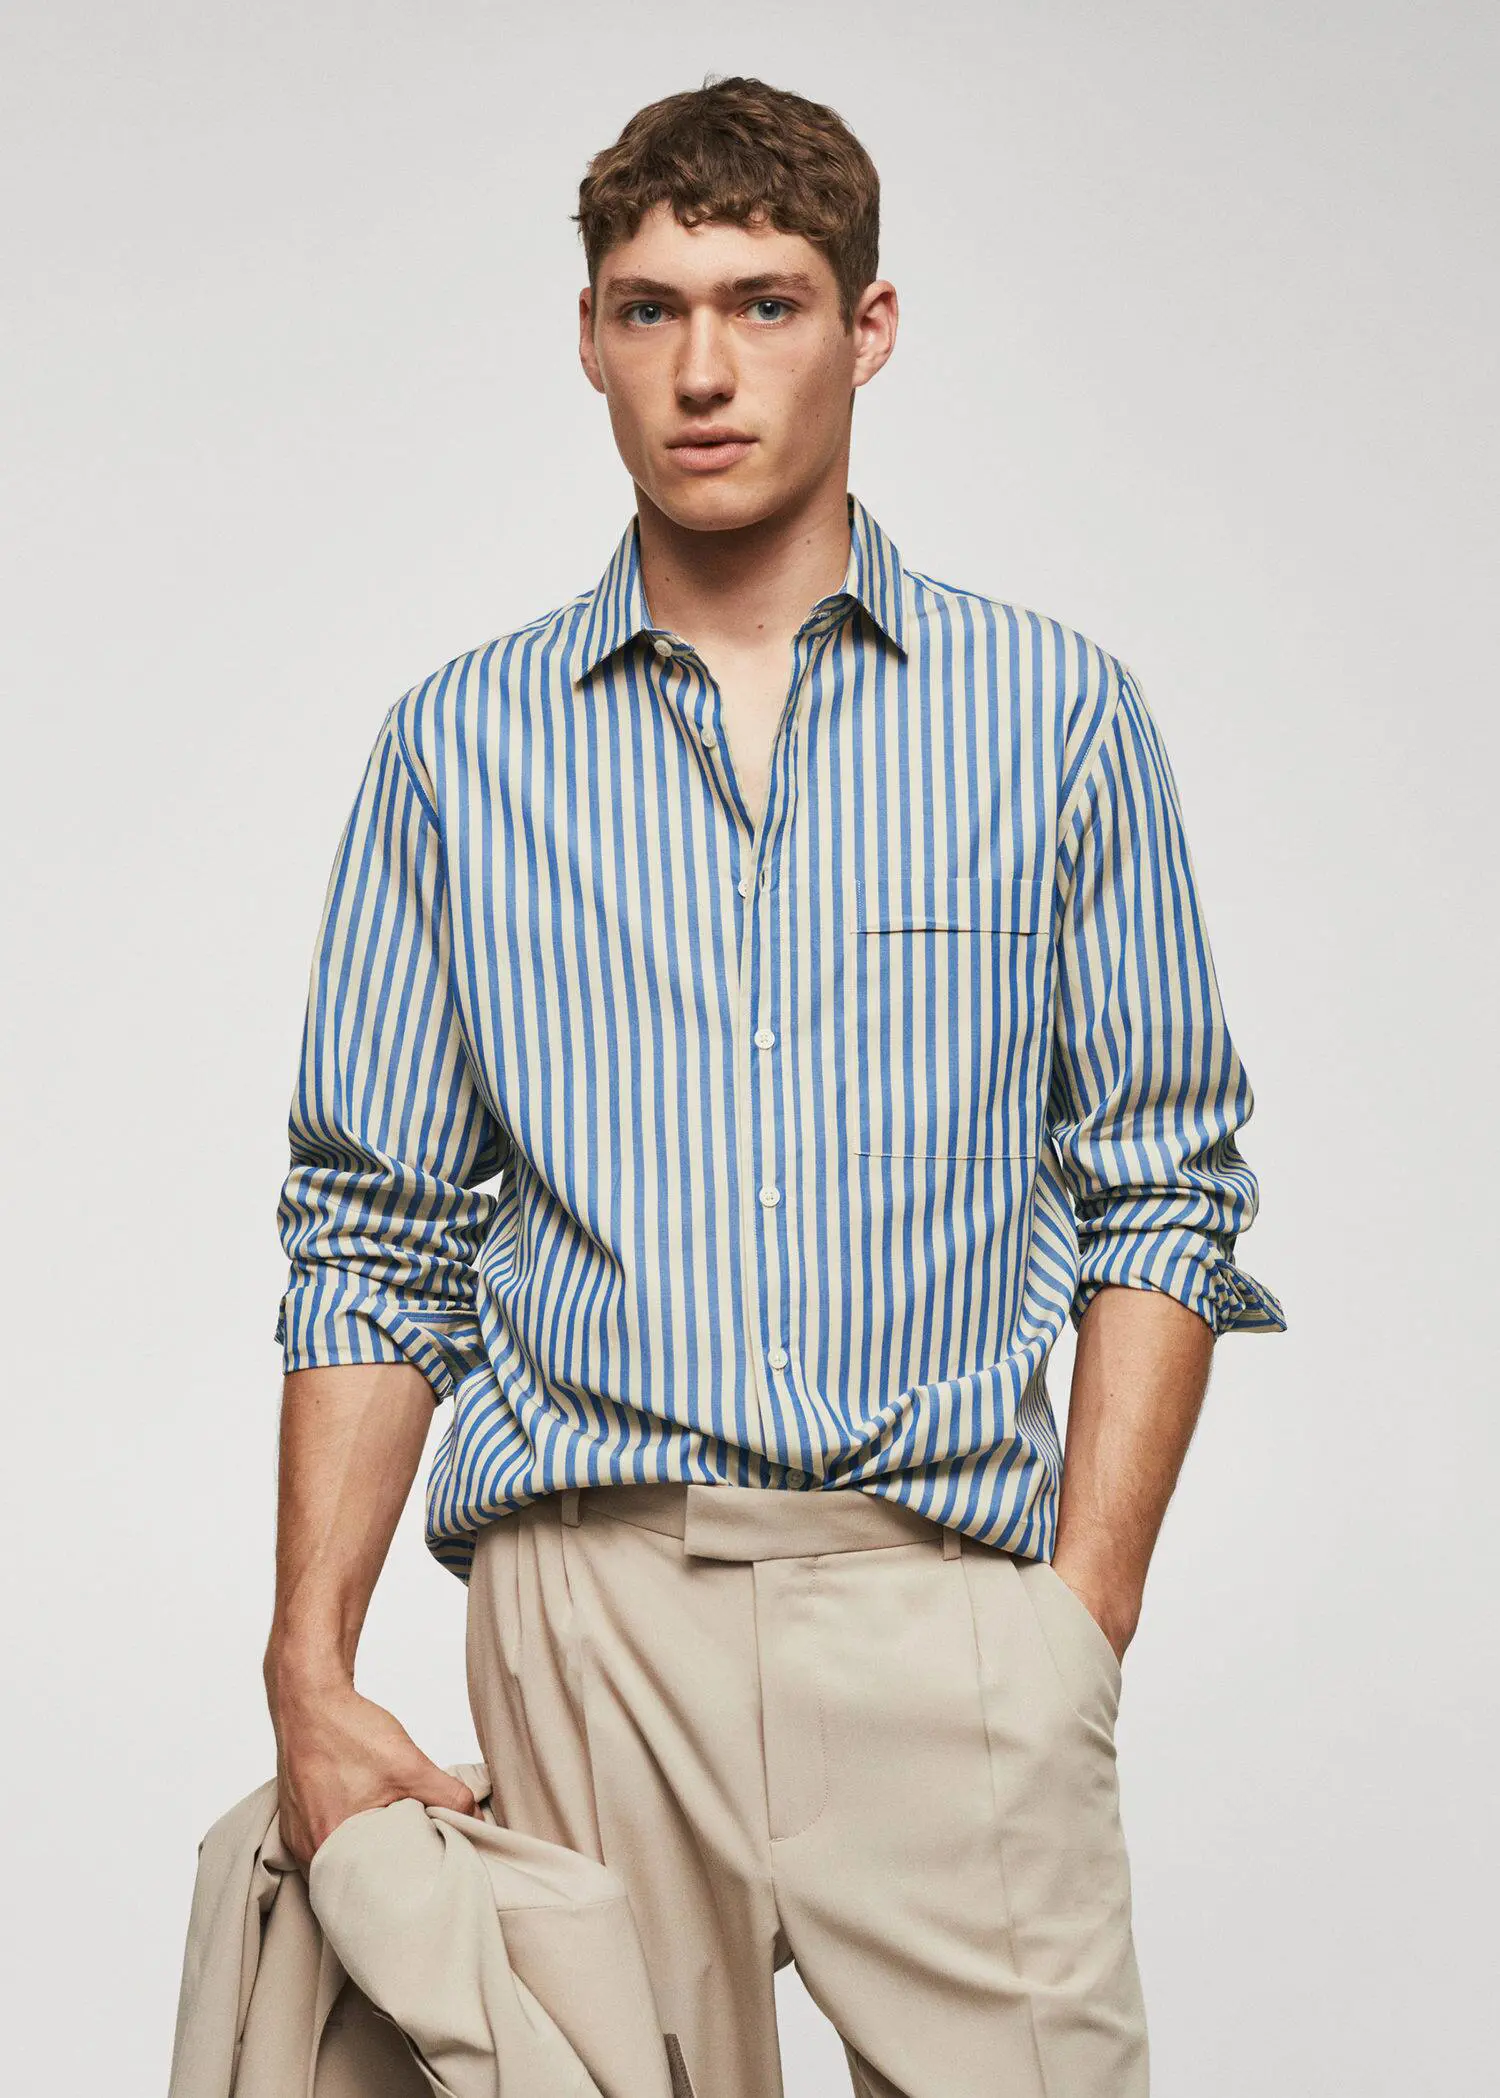 Mango 100% cotton Kodak striped shirt . a man in a striped shirt is holding his hands in his pockets. 